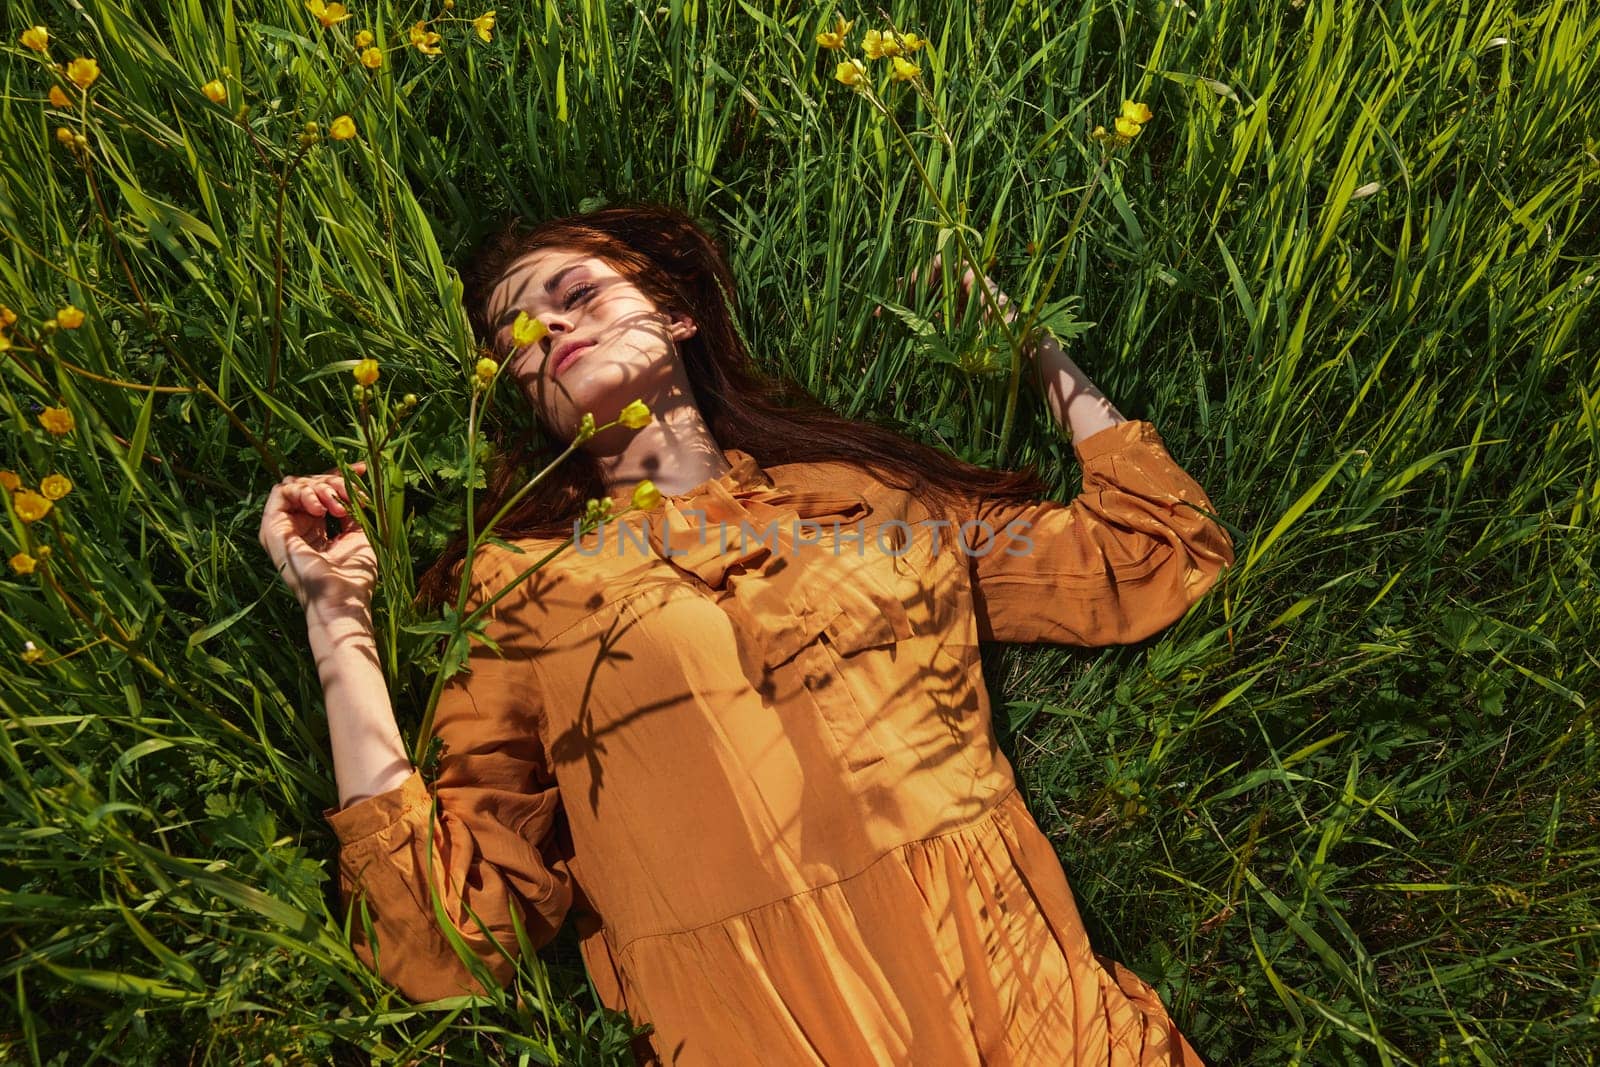 a calm woman with long red hair lies in a green field with yellow flowers, in an orange dress with her eyes closed, spreading her arms to the sides, enjoying peace and recuperating by Vichizh